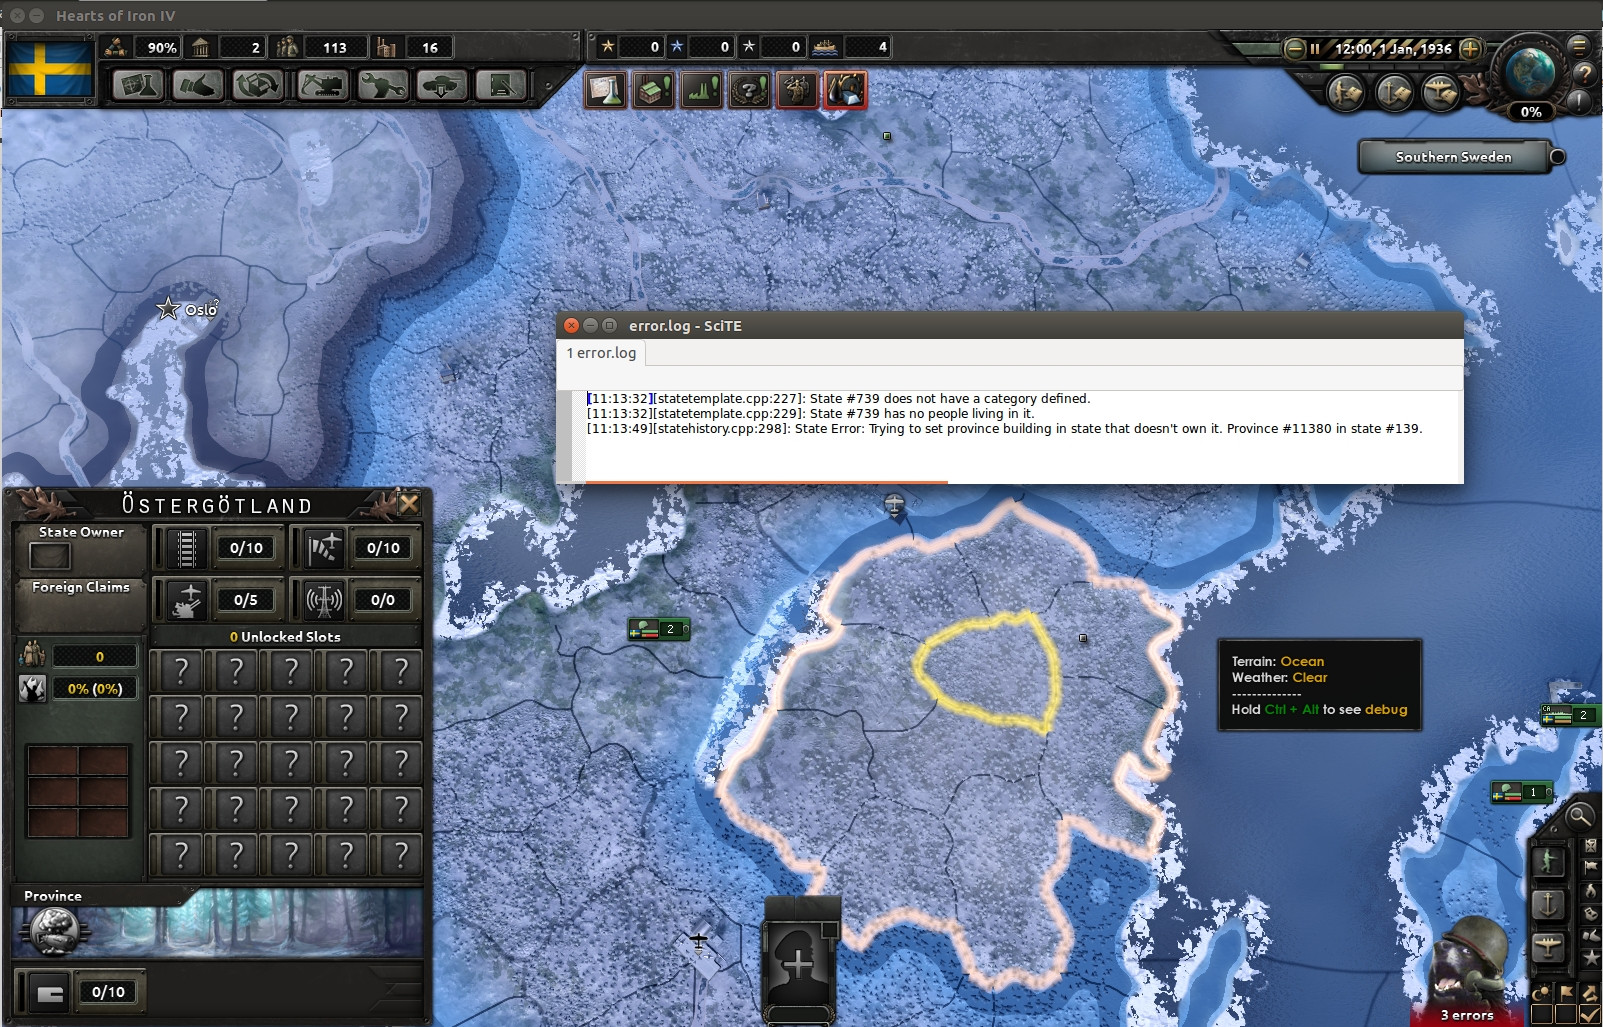 How to install mods for hearts of iron 4 machine